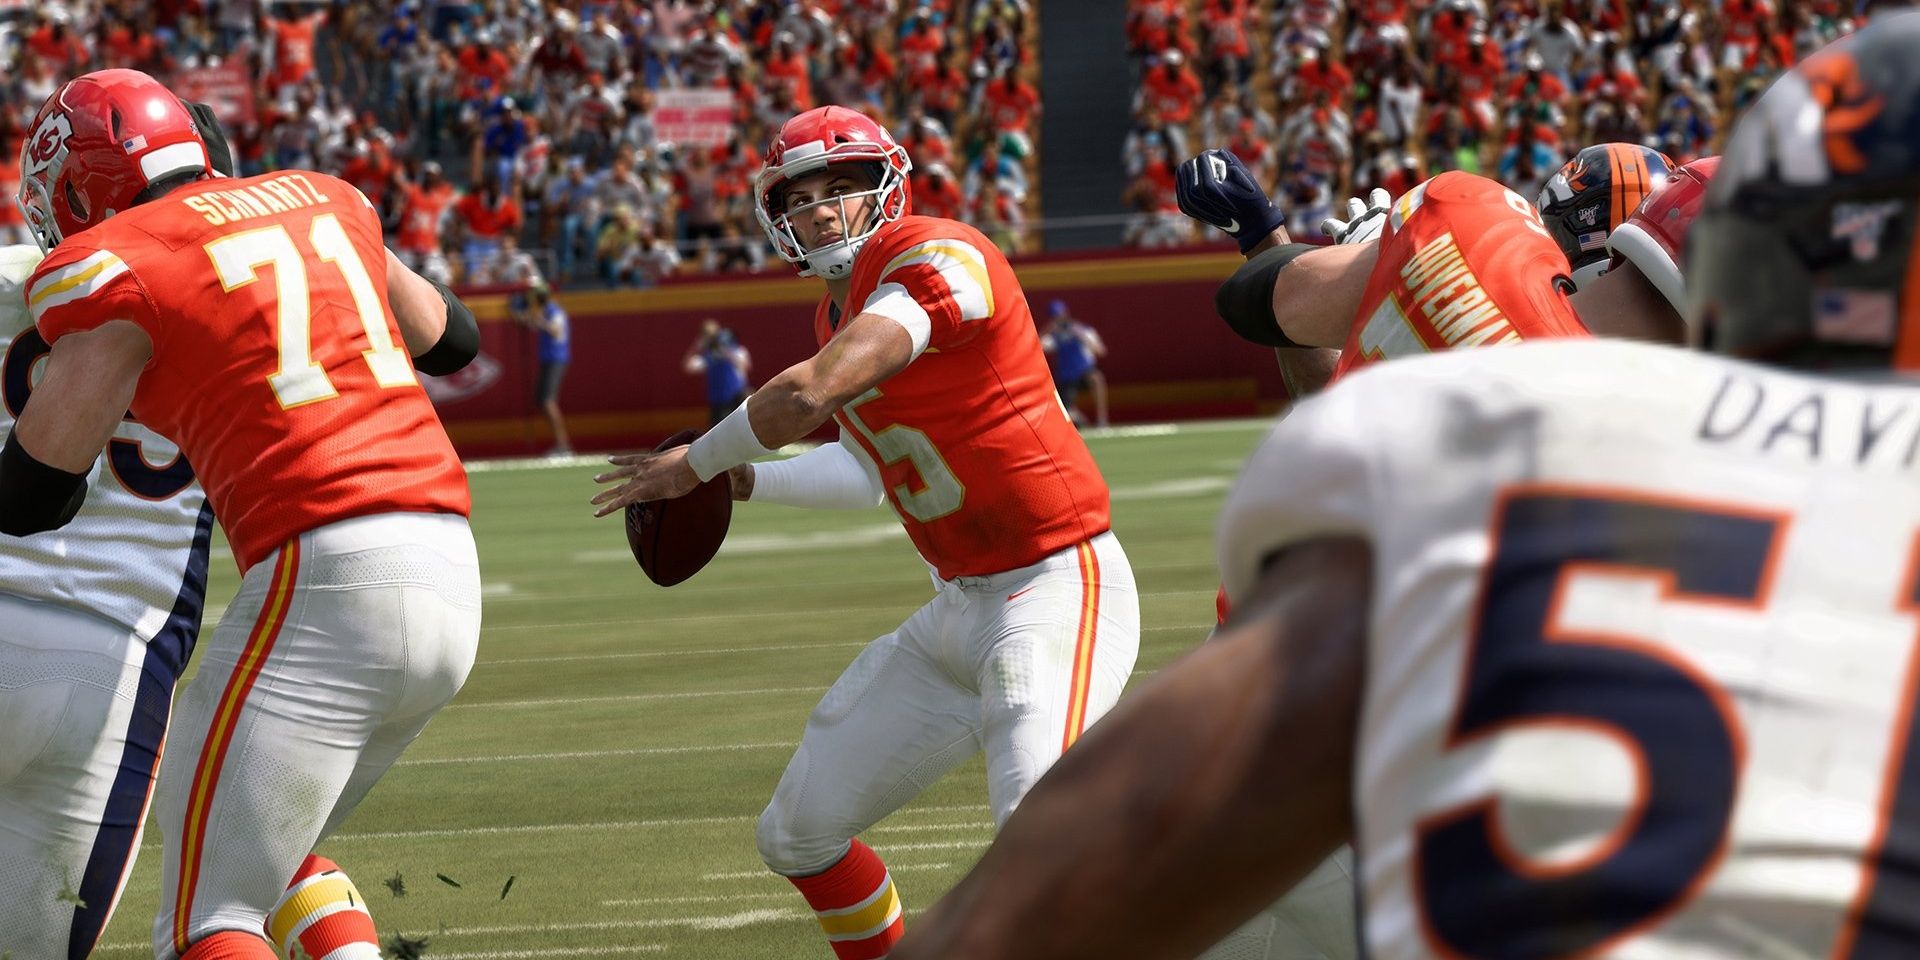 Patrick Mahomes III preparing to throw the football in Madden NFL 20.